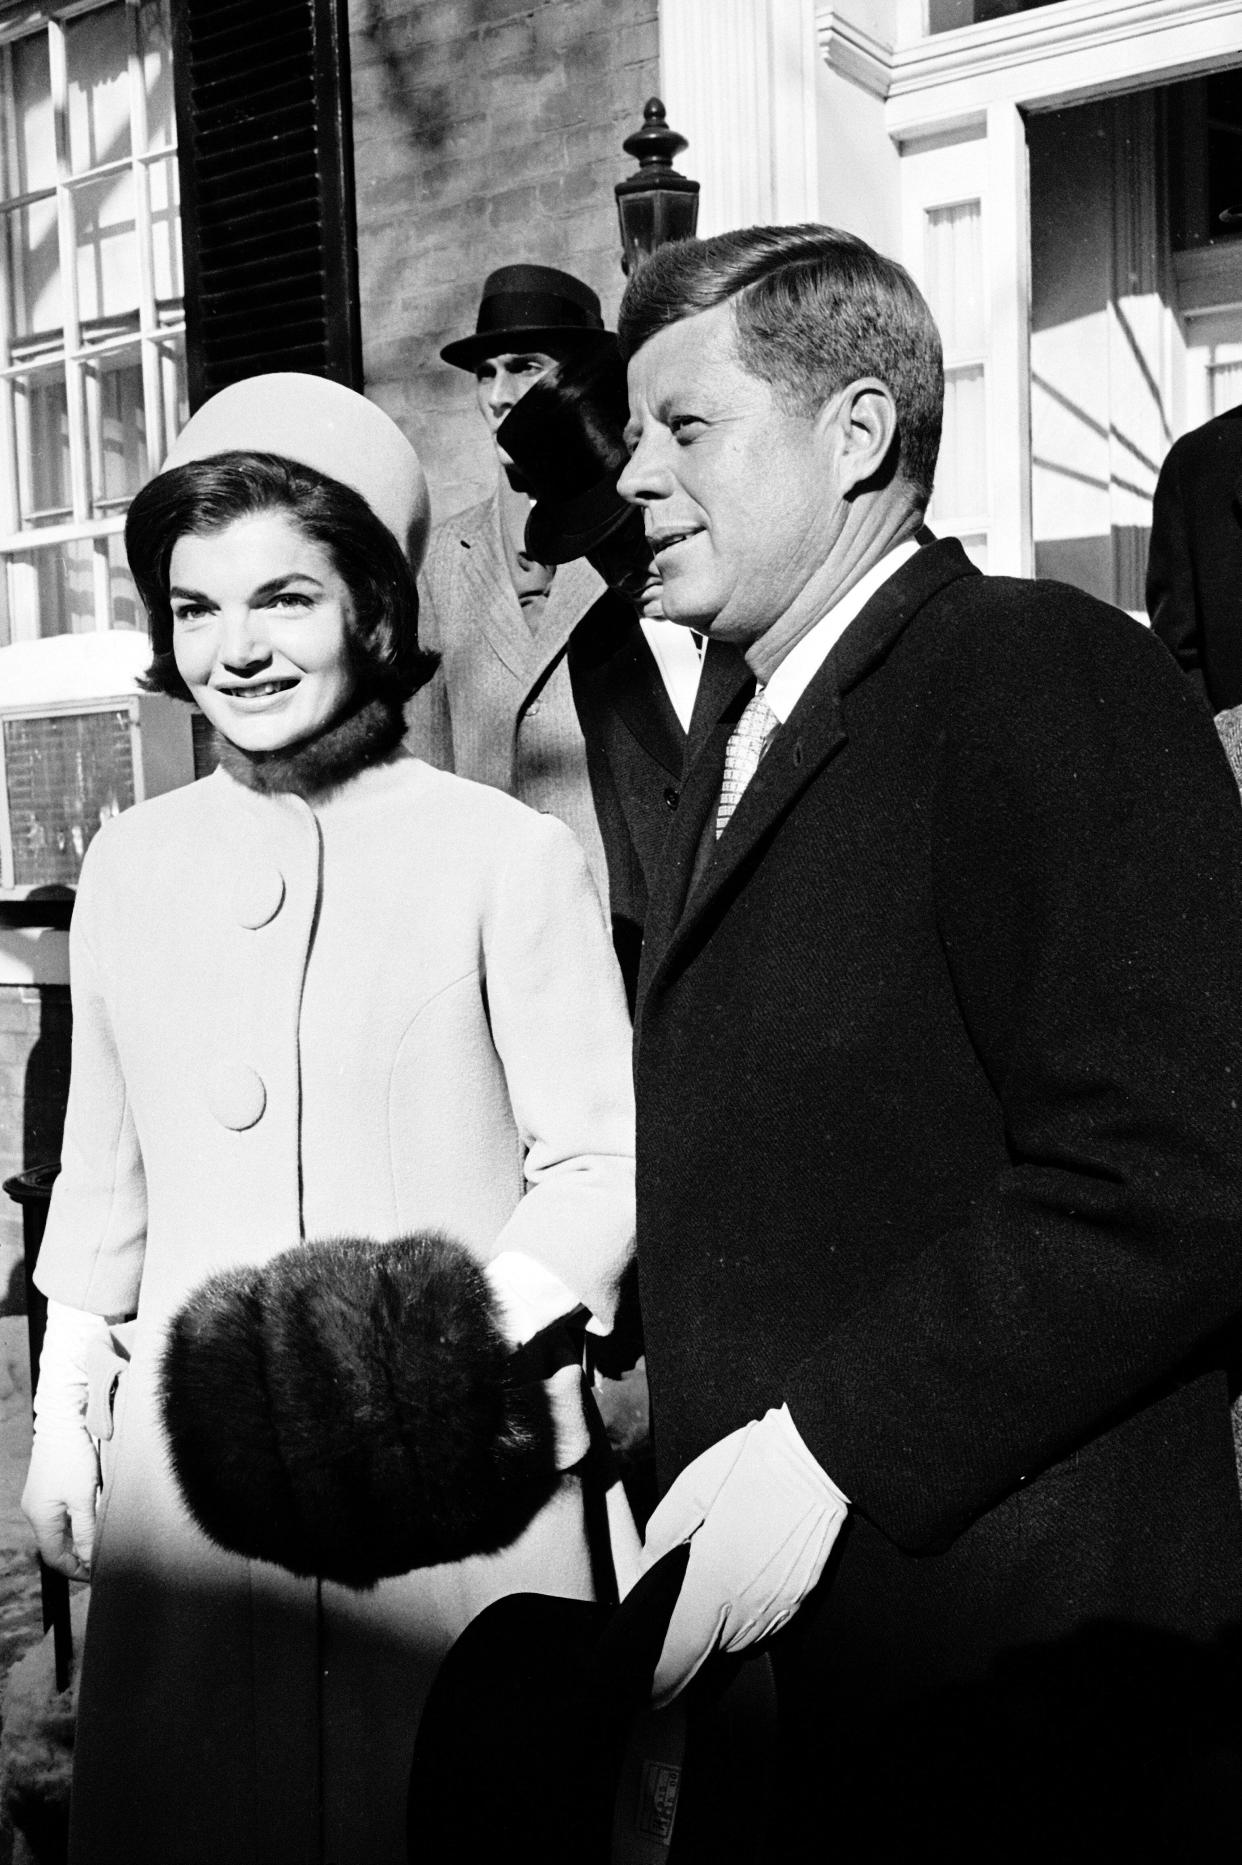 Jacqueline Kennedy, wearing one of the pillbox hats that became a signature look for her, poses for photos with husband John F. Kennedy as he prepared to be inaugurated in 1961. Washington had been buffeted by a heavy snowstorm the day before, but the sun shined brightly as he took the oath.